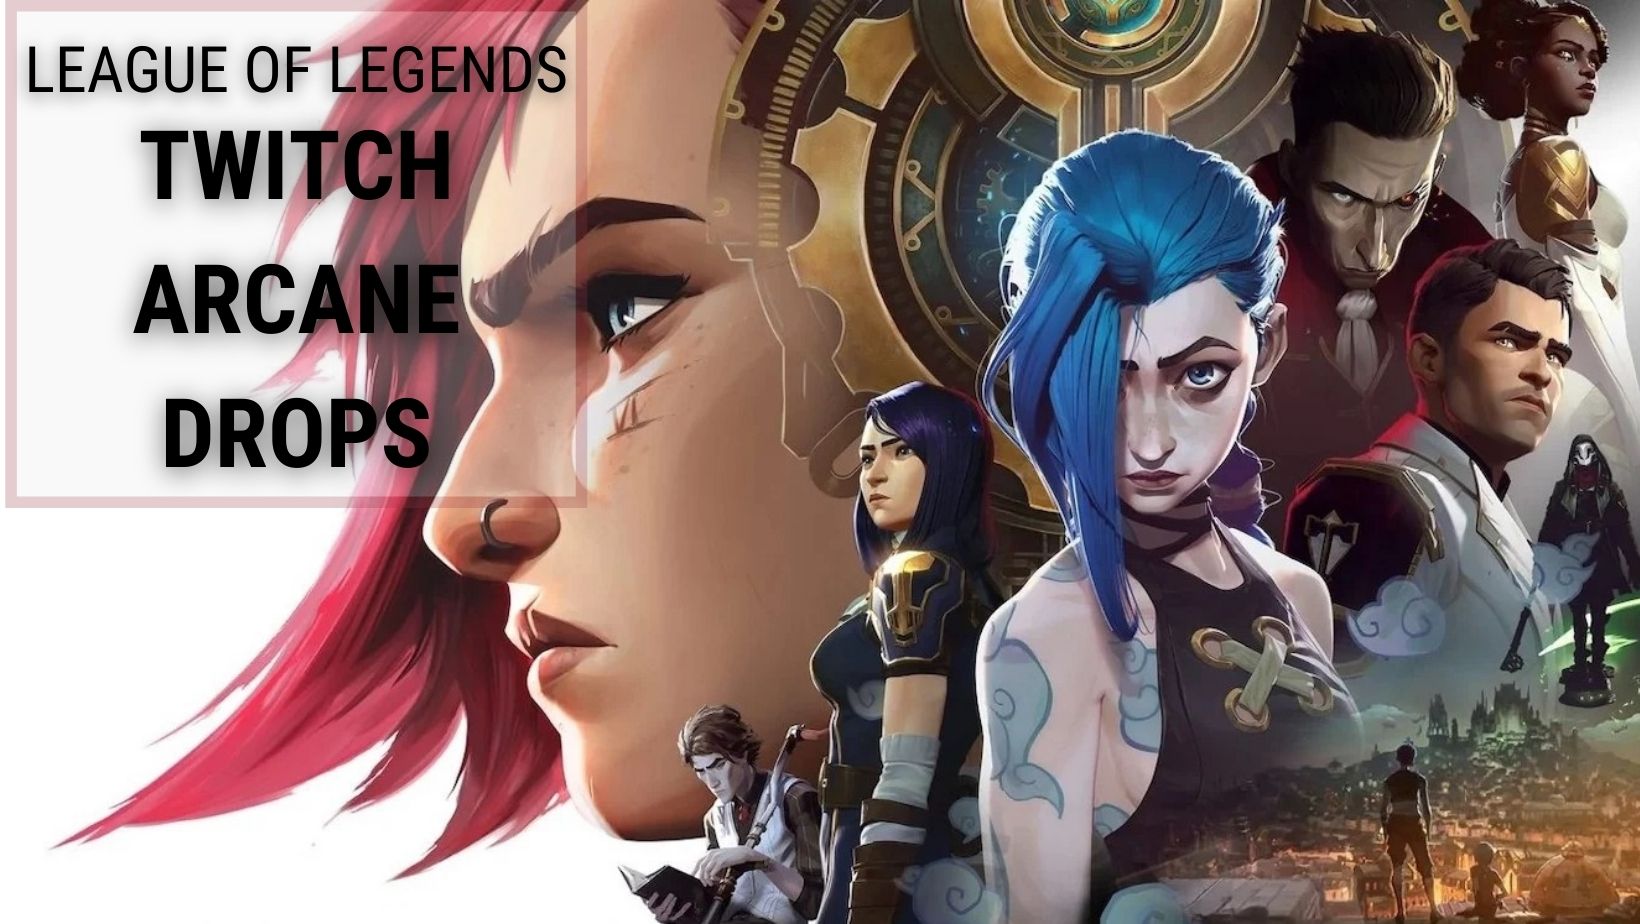 How to Redeem Twitch Arcane Drops in League of Legends